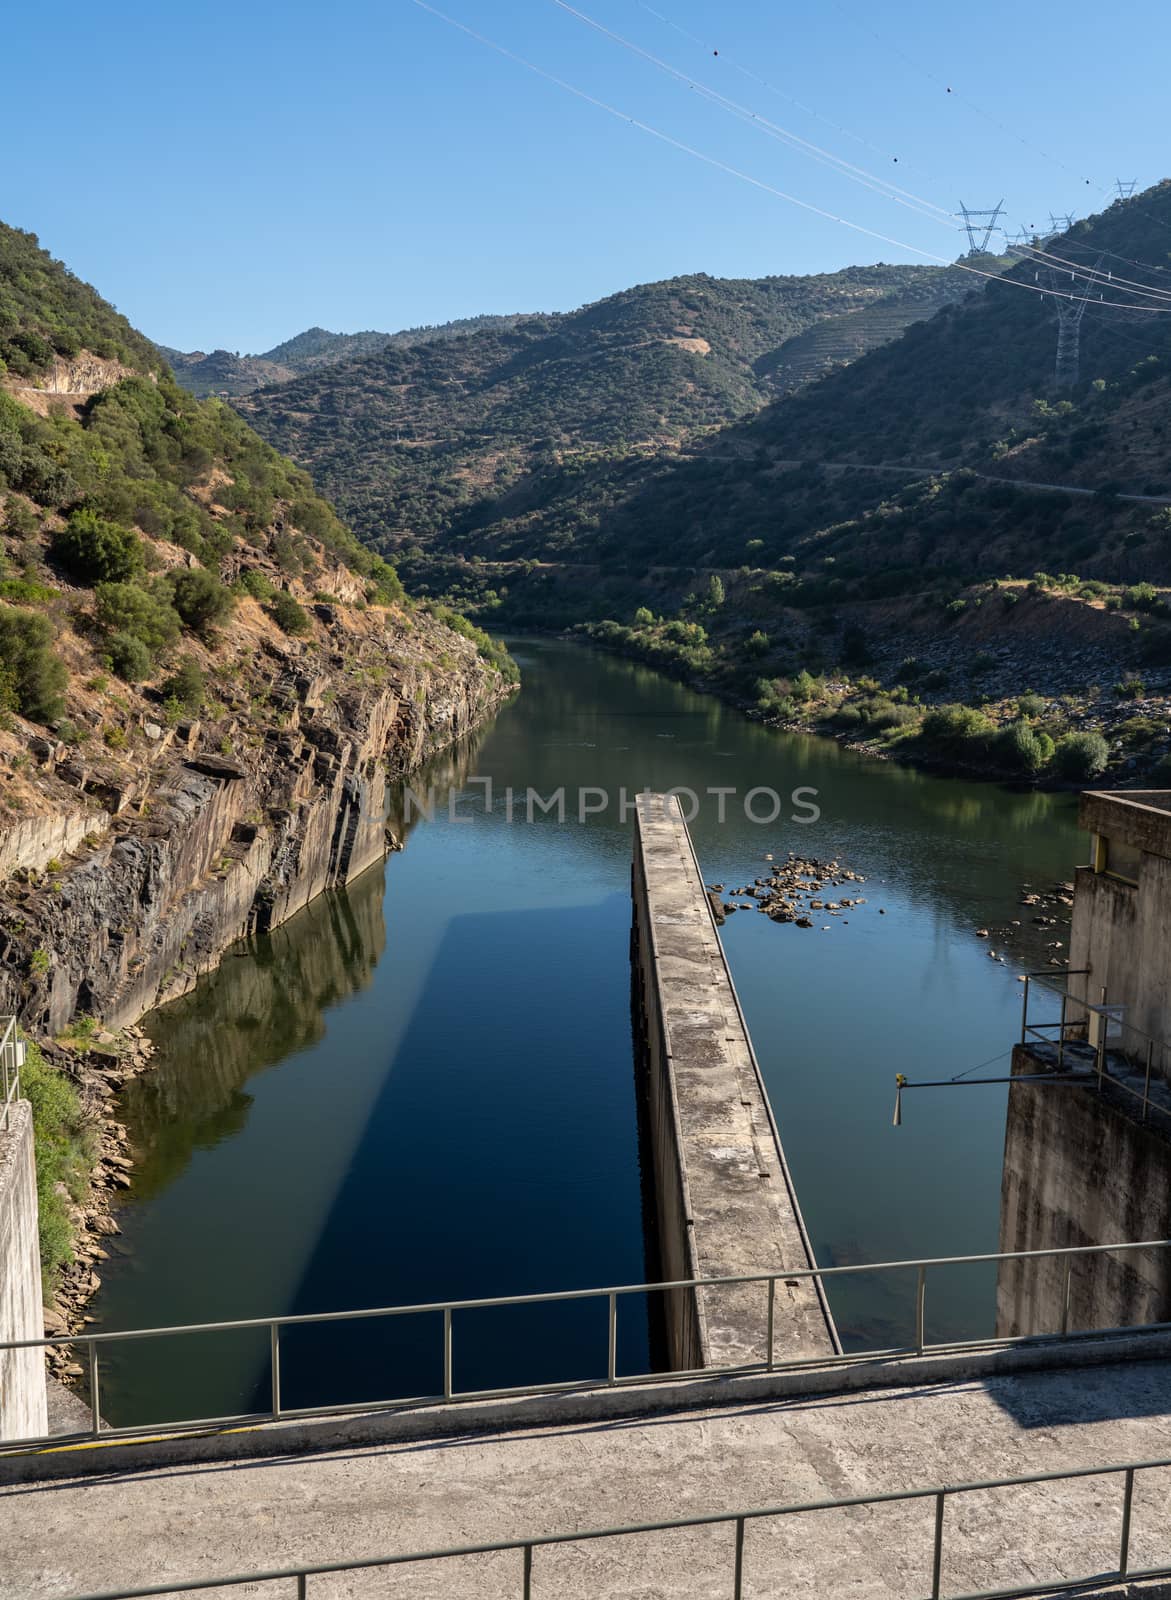 Boat rising inside the lock of the Barragem da Valeira dam on the Douro river by steheap